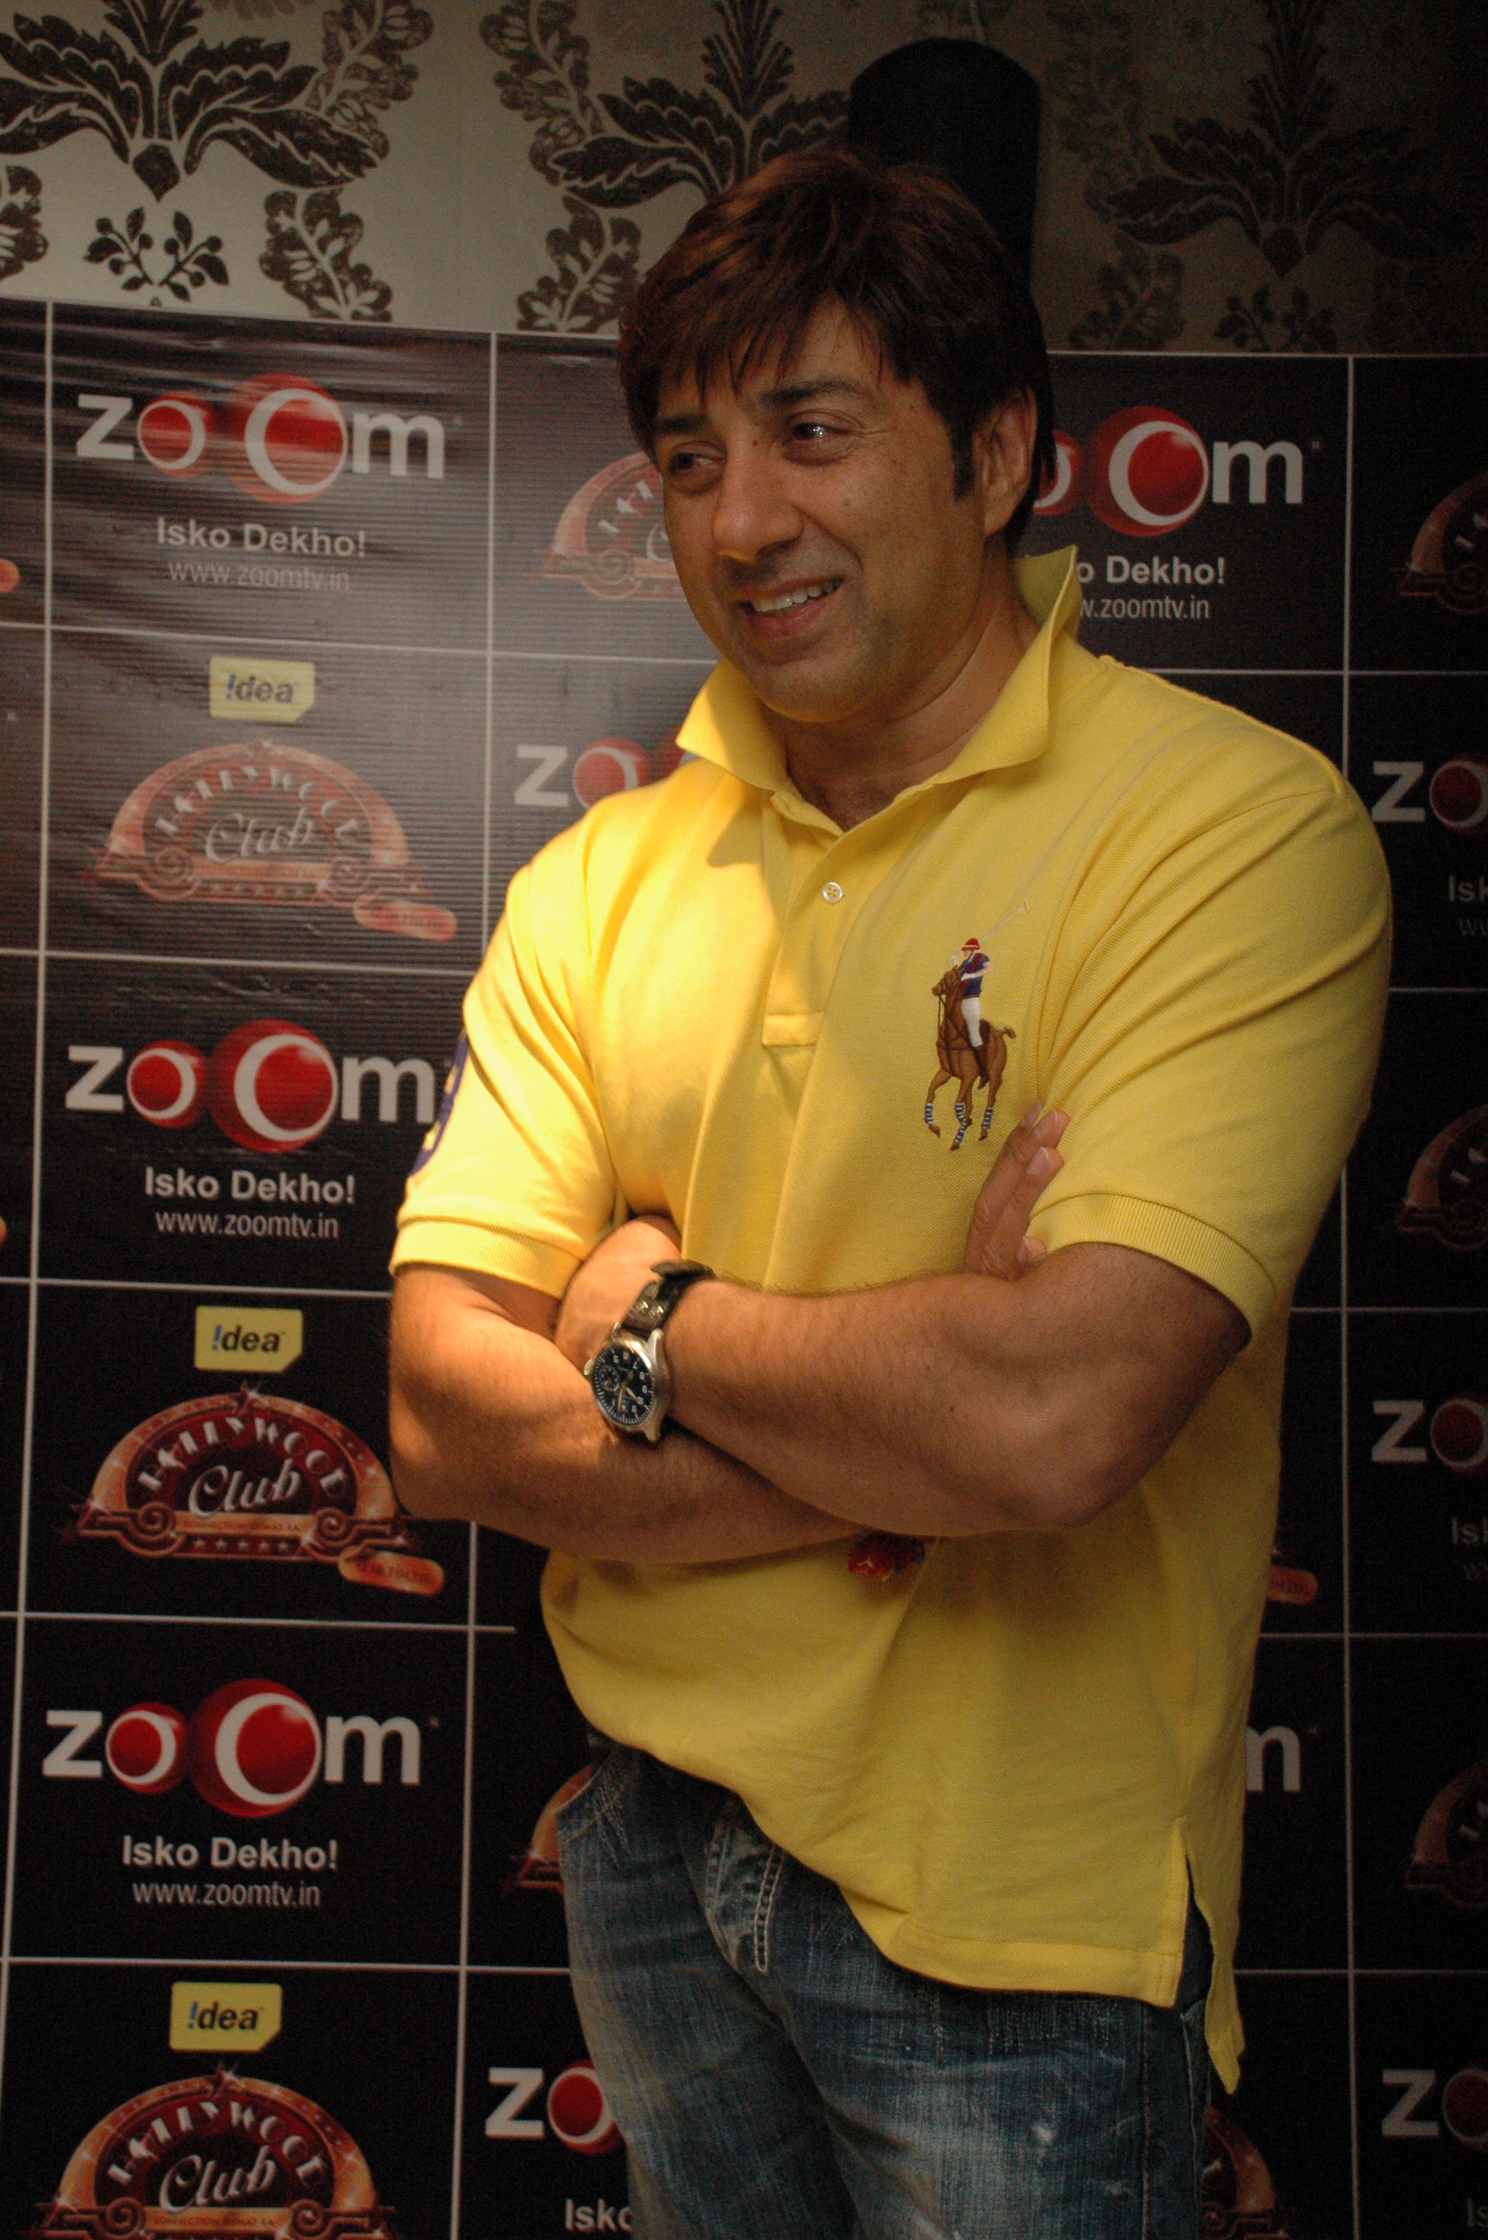 Sunny Deol at the Zo0m Bollywood Party at Bollywood Club on August 28th 2008